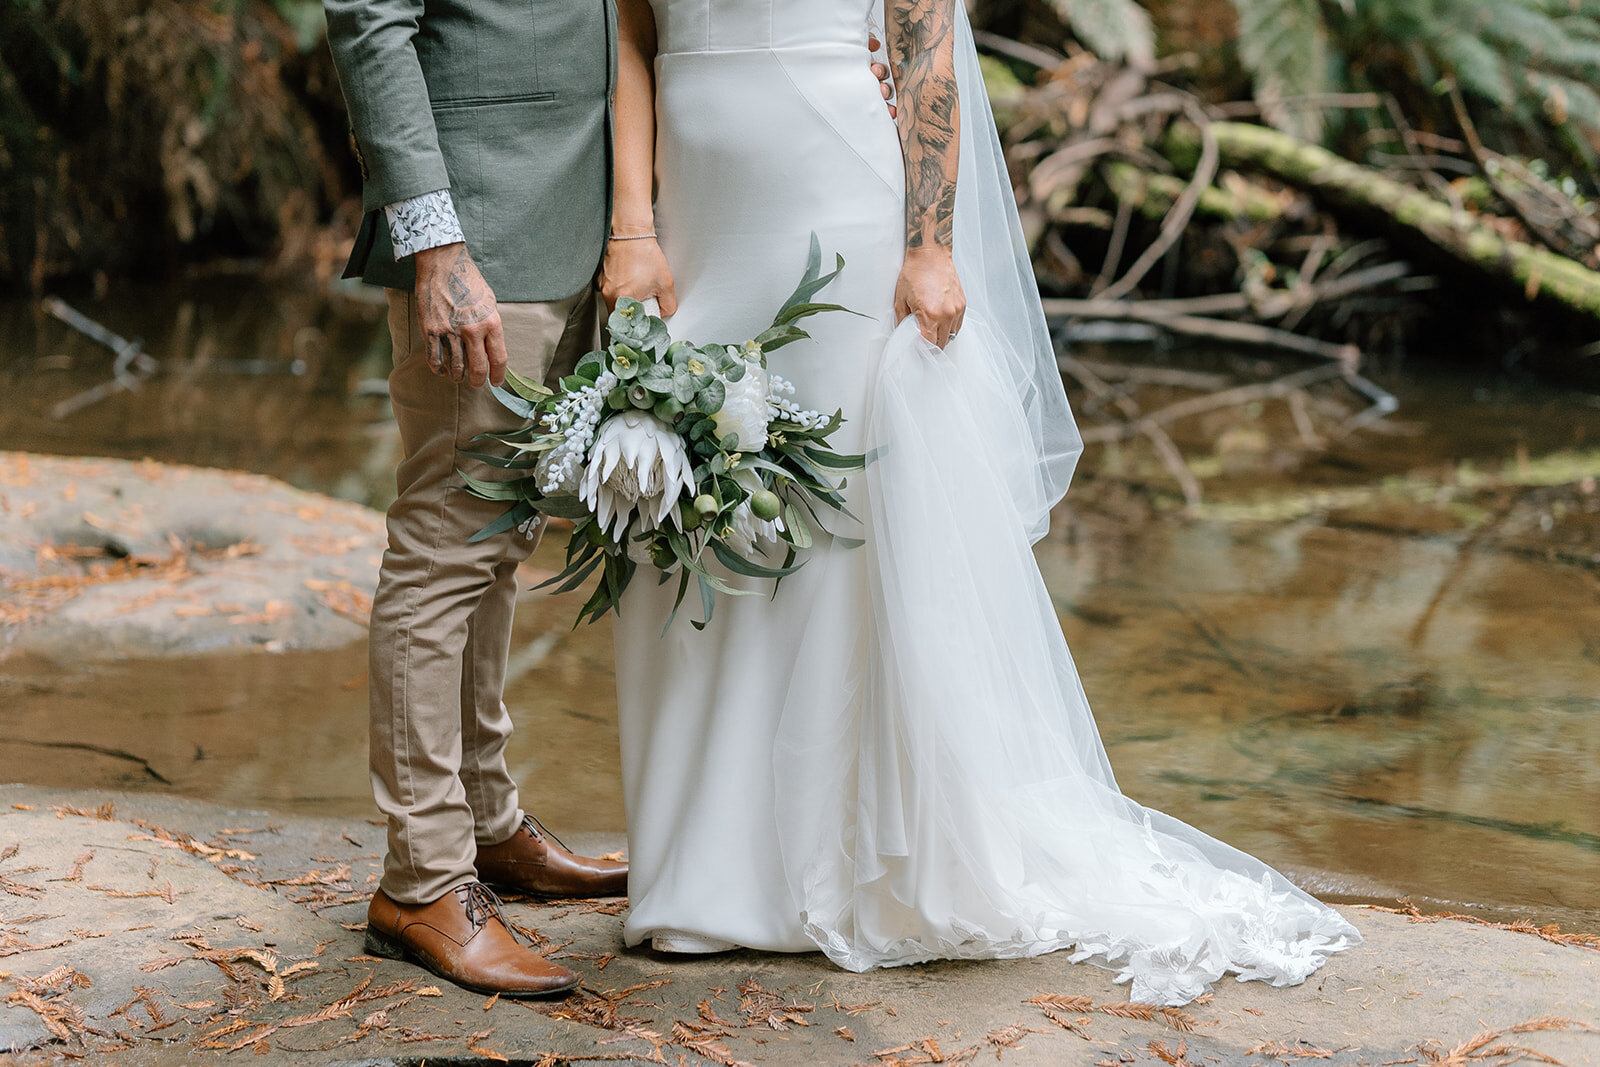 Stacey&Cory-Coast&Pines-357